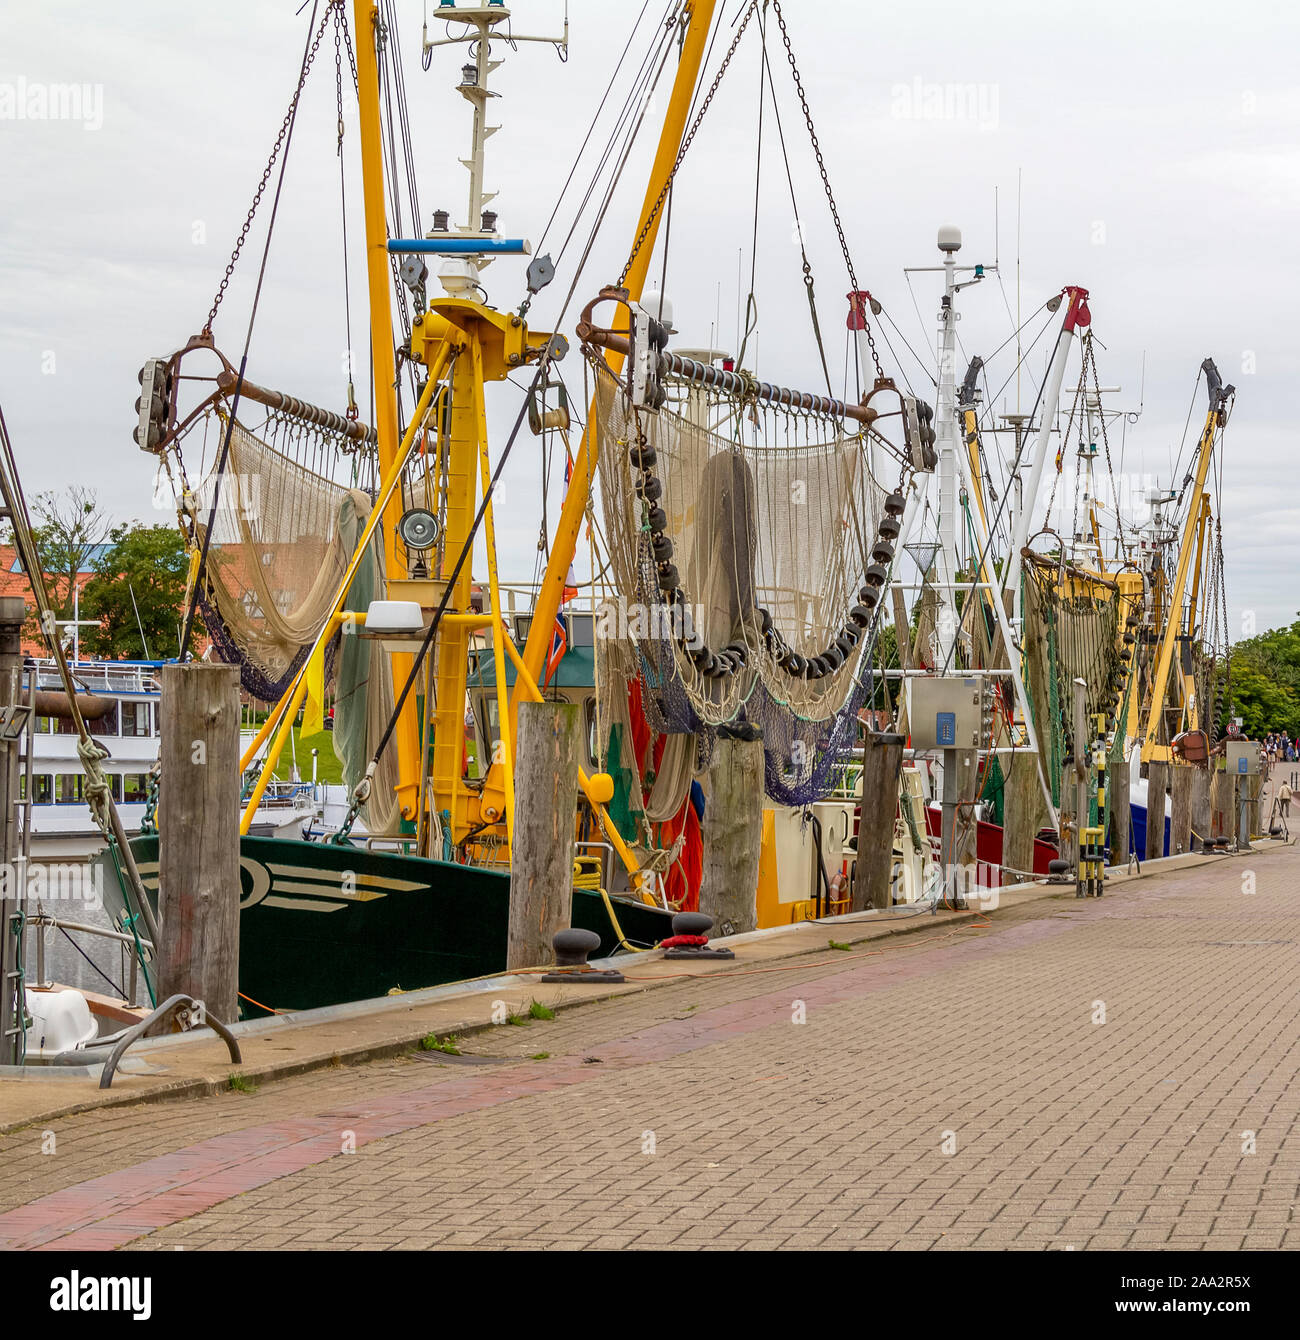 shrimp cutters seen in Greetsiel, a idyllic village located in East Frisia, Northern Germany Stock Photo